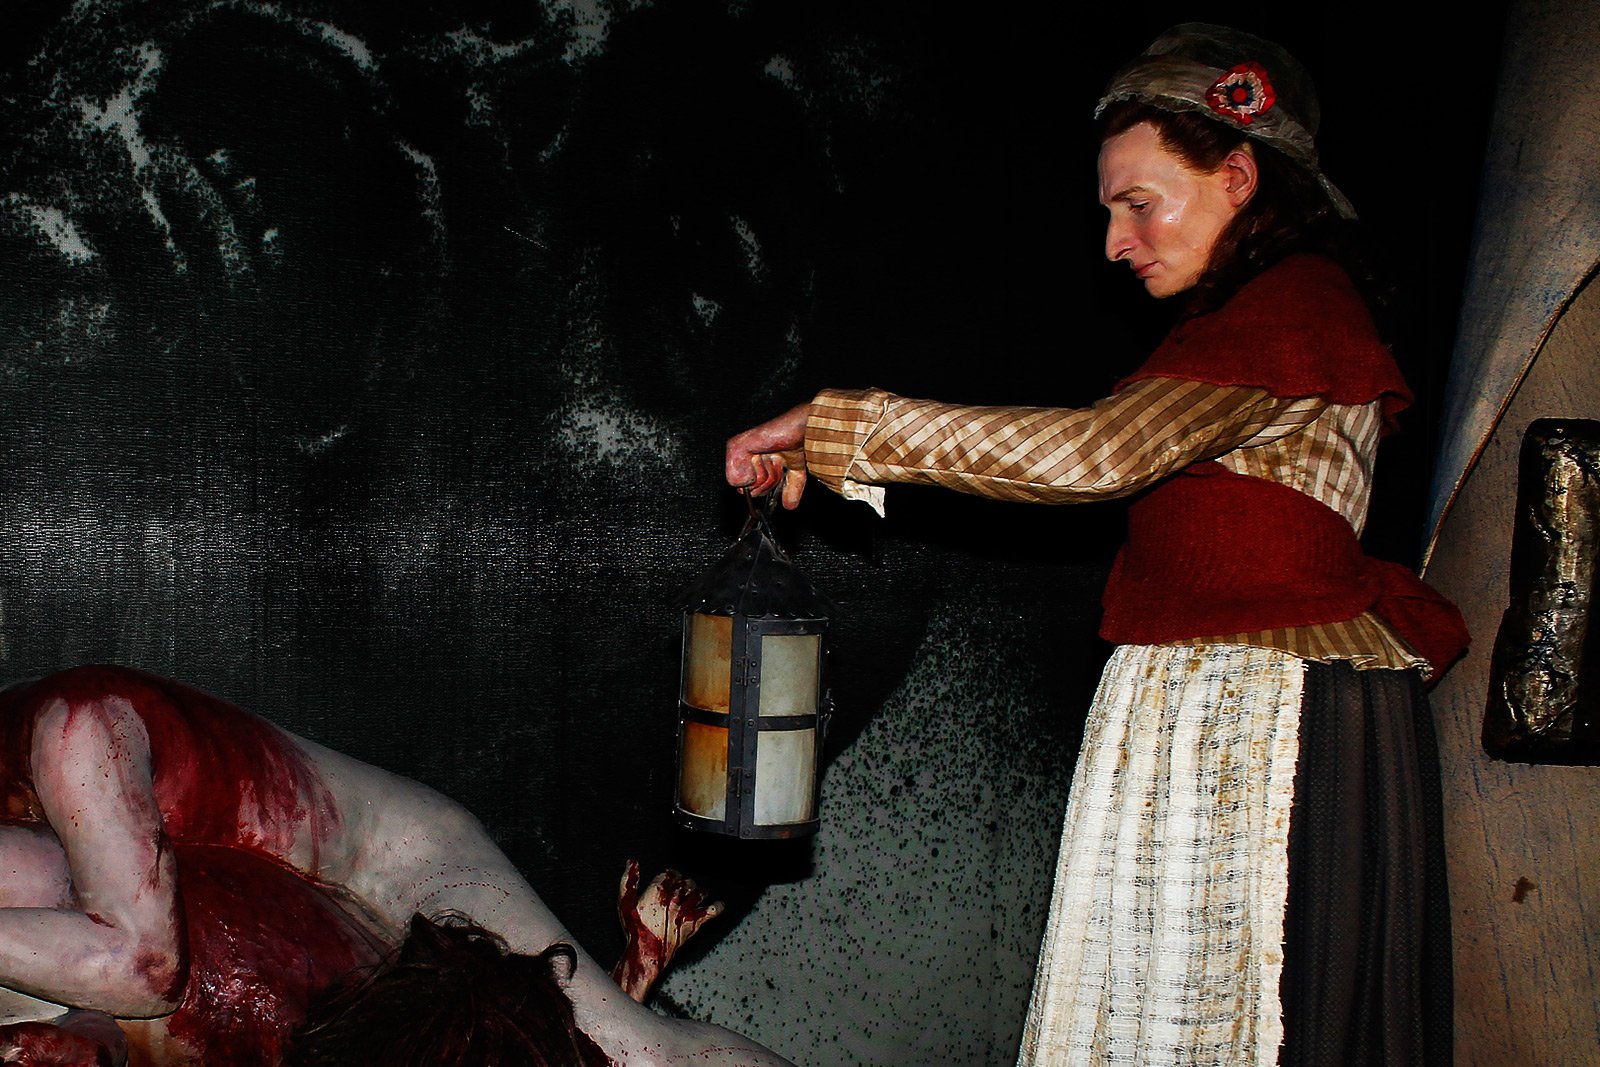 How to see Jack The Ripper's victims in Madam Tussauds Museum in London